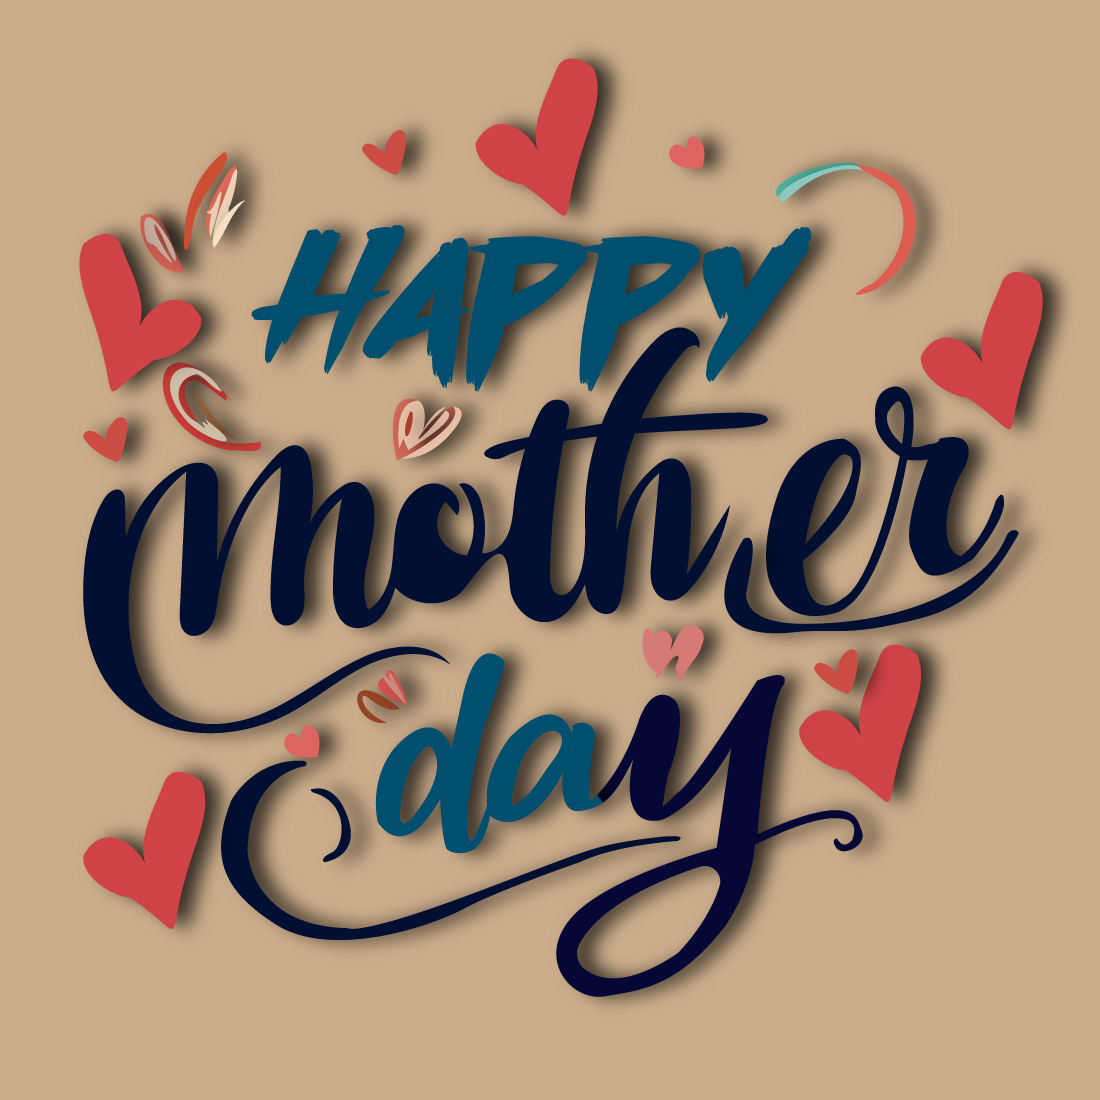 Mother's Day template Design cover image.